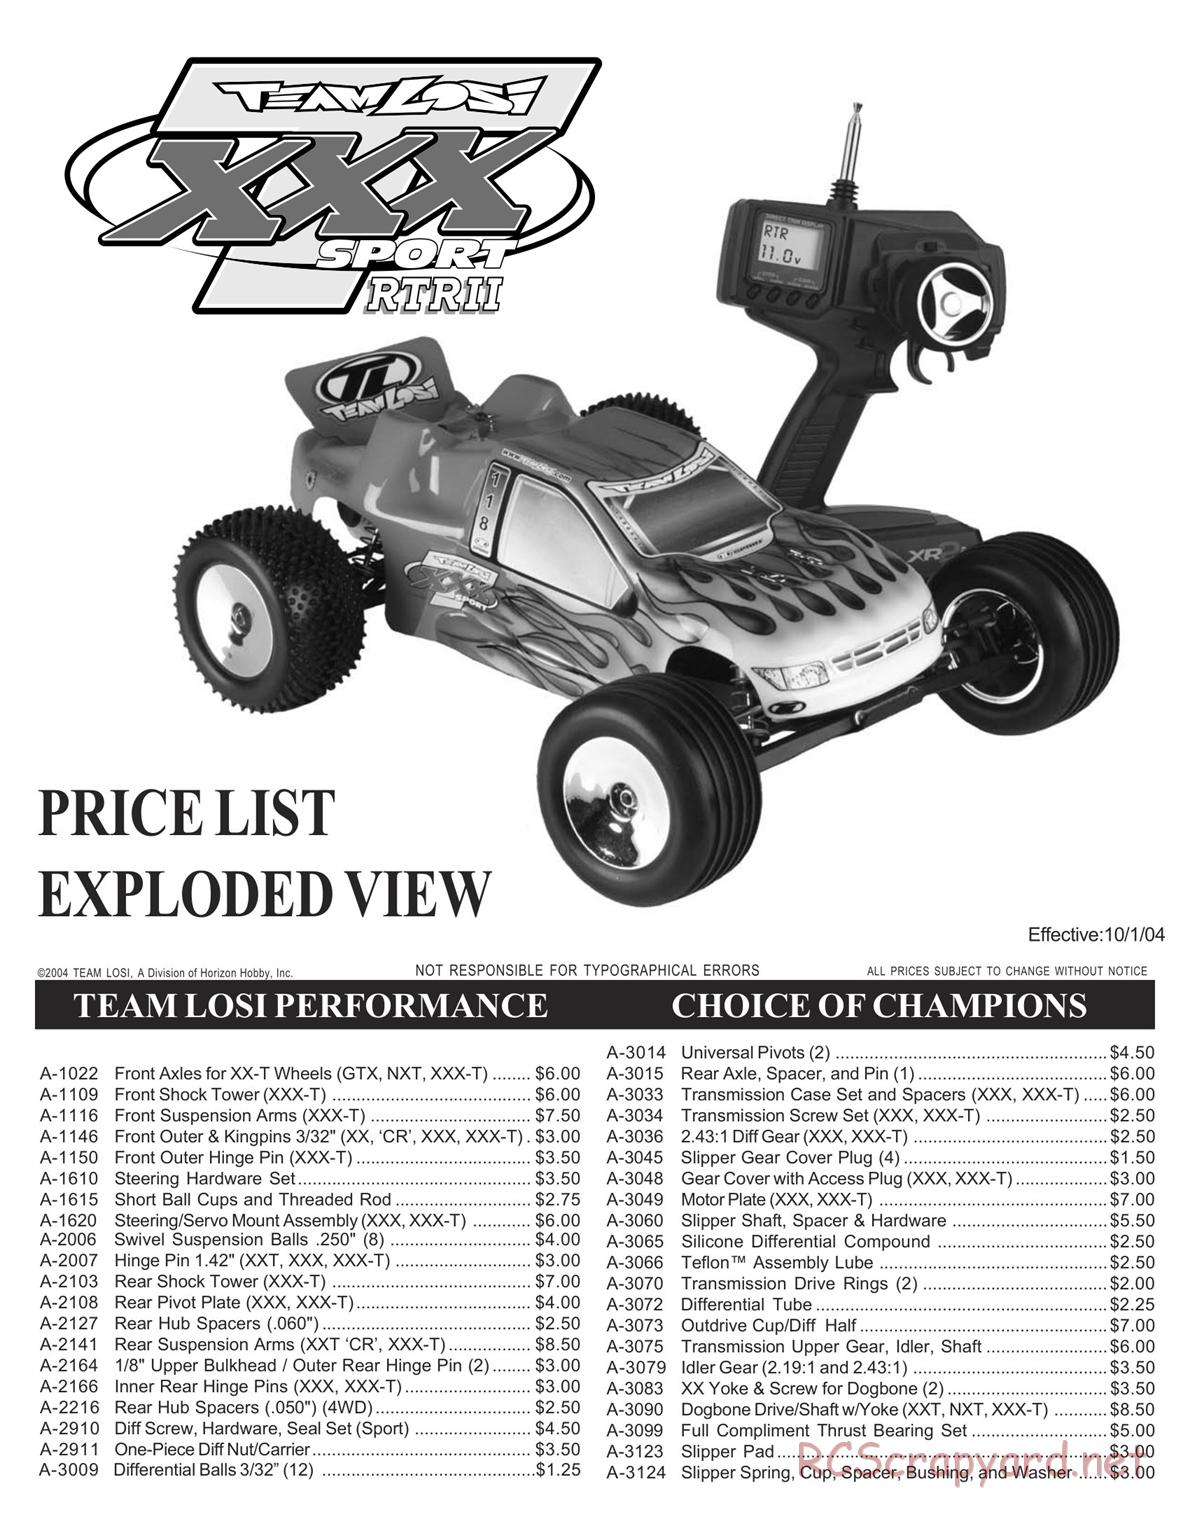 Team Losi - XXXT Sport RTRII - Manual - Page 1